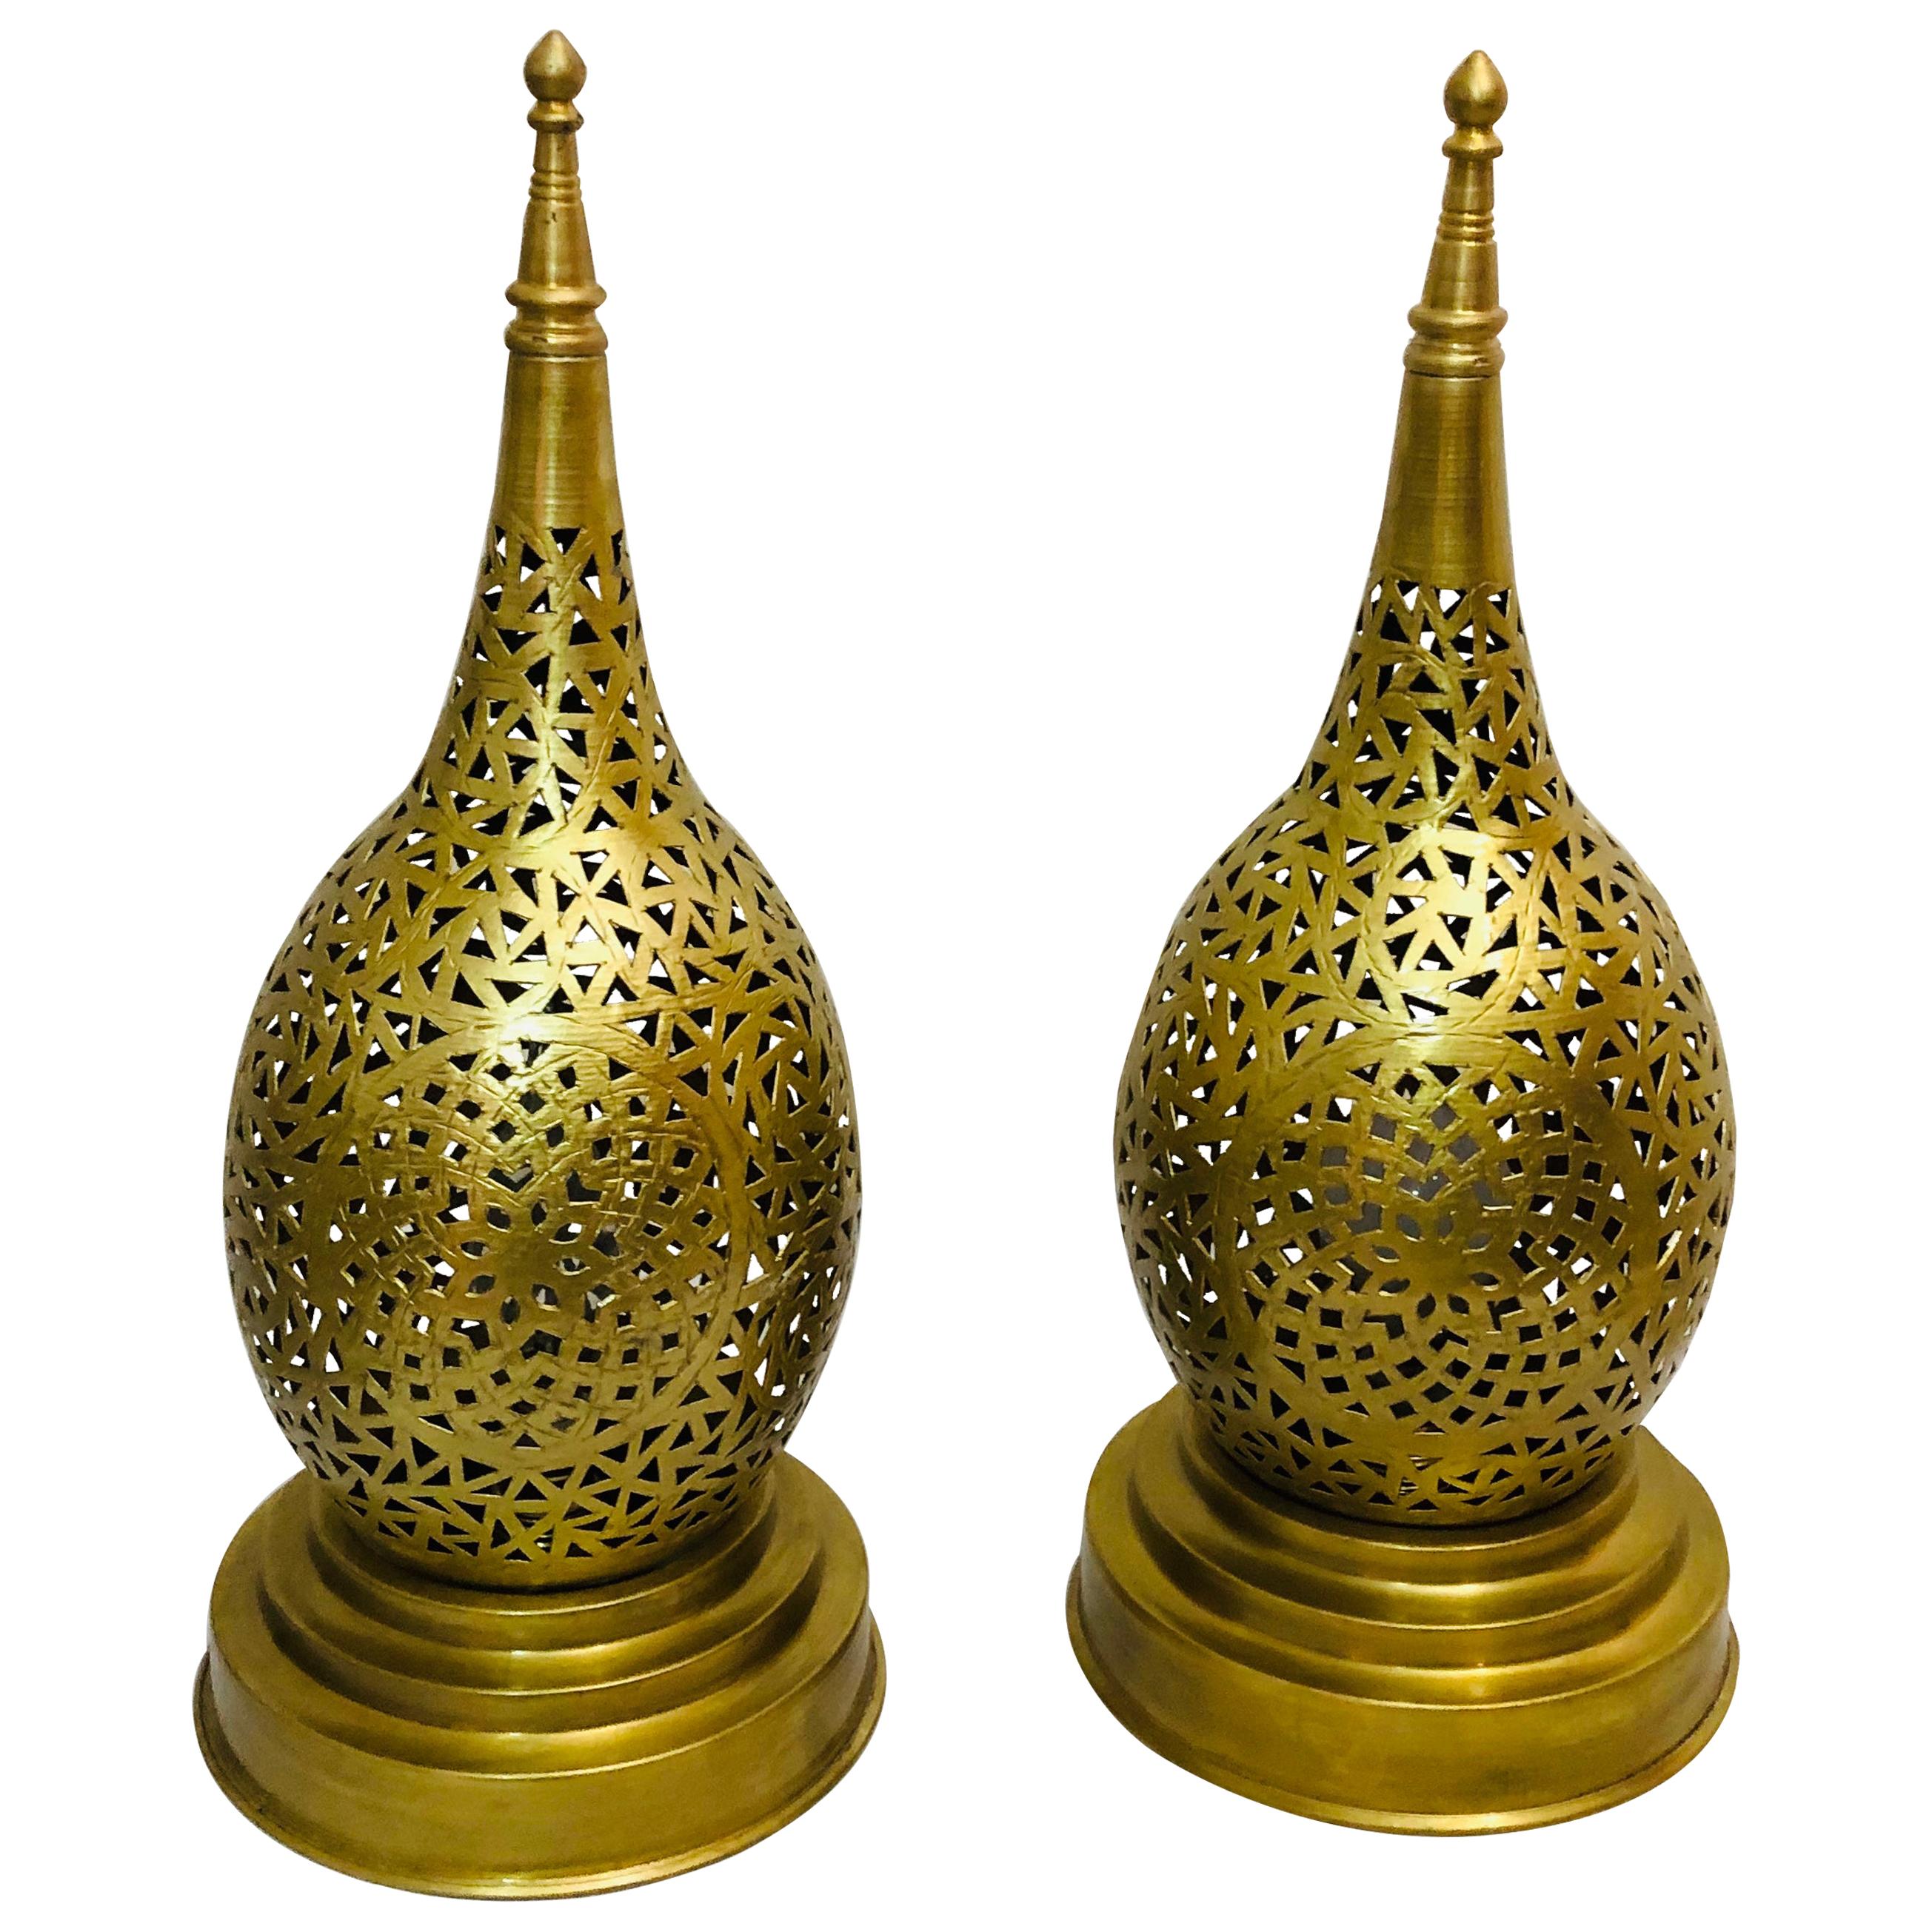 Tear Shaped Gold Brass Moroccan Table Lamps, a Pair For Sale